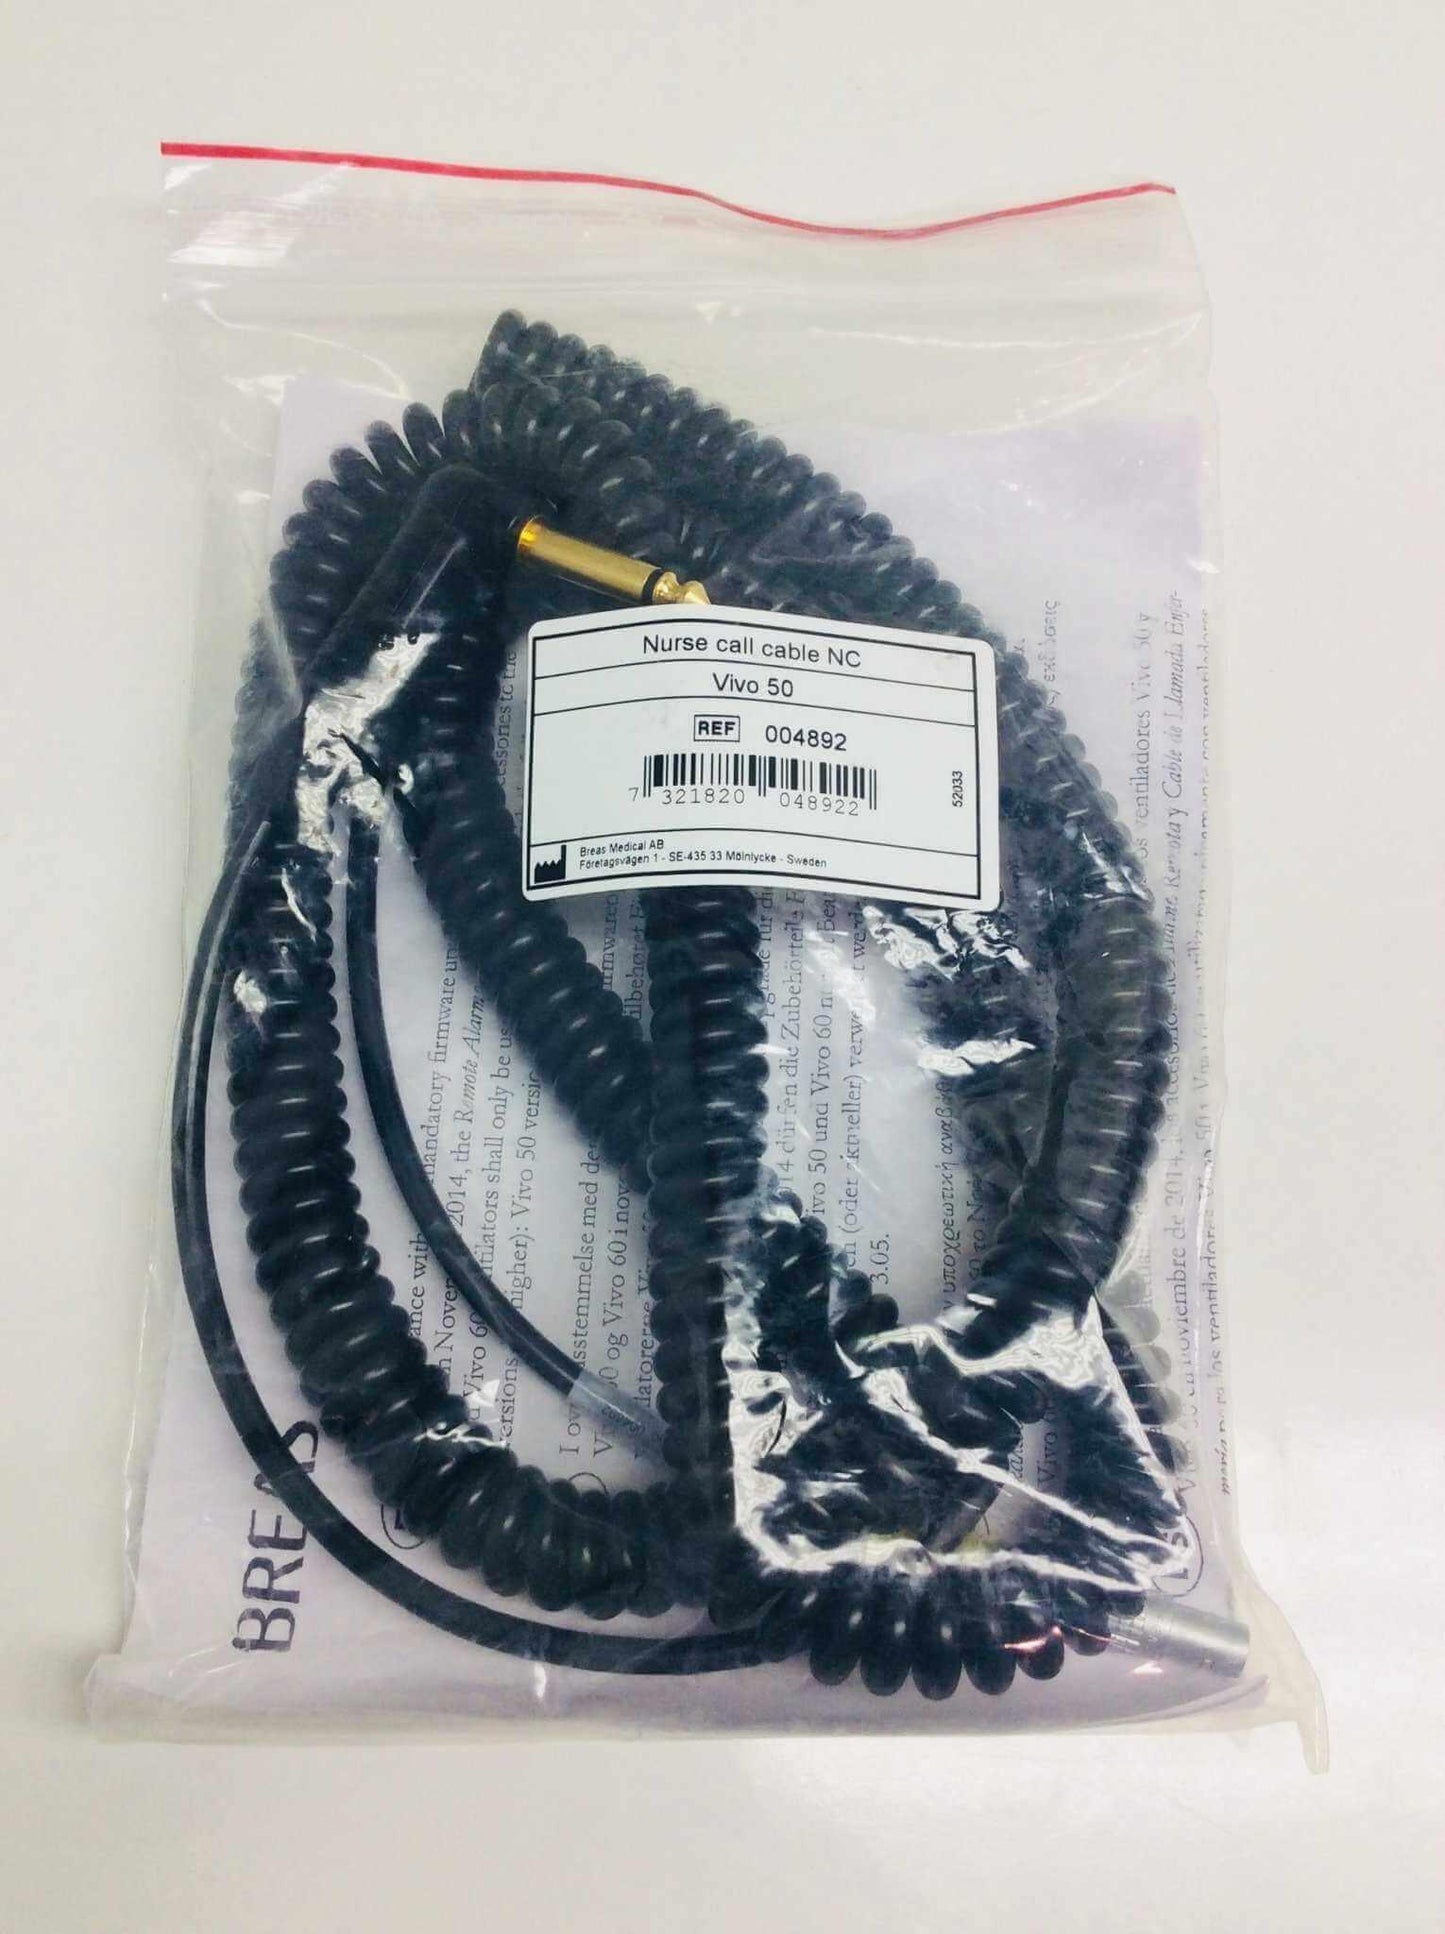 NEW Breas HDM Nurse Call Cable NC for Vivo 50 60 Ventilator 004892 Warranty FREE Shipping - MBR Medicals